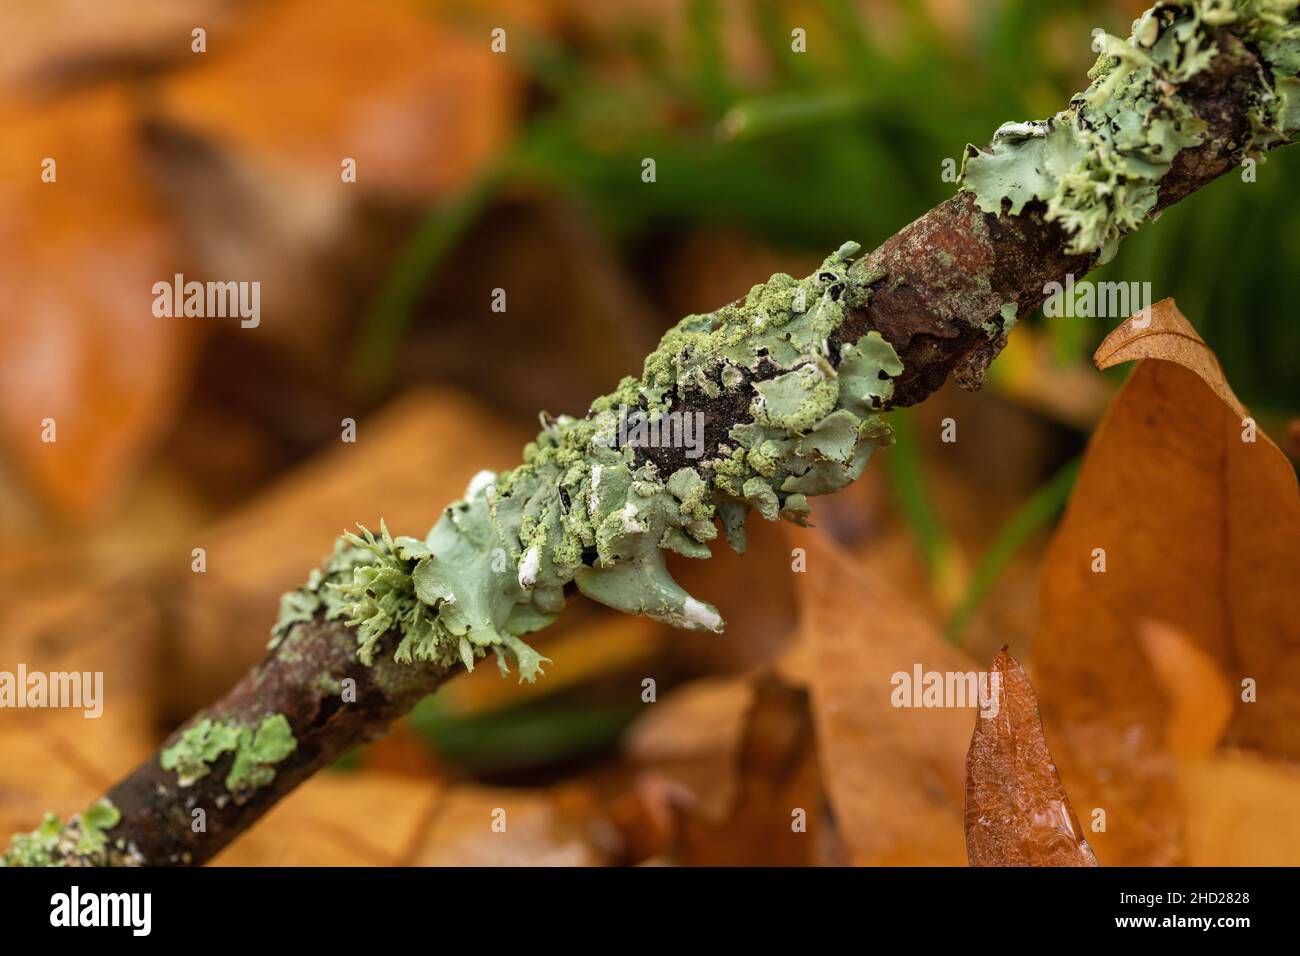 Close up of green lichens growing on a fallen branch on the forest floor during Autumn, England, UK Stock Photo